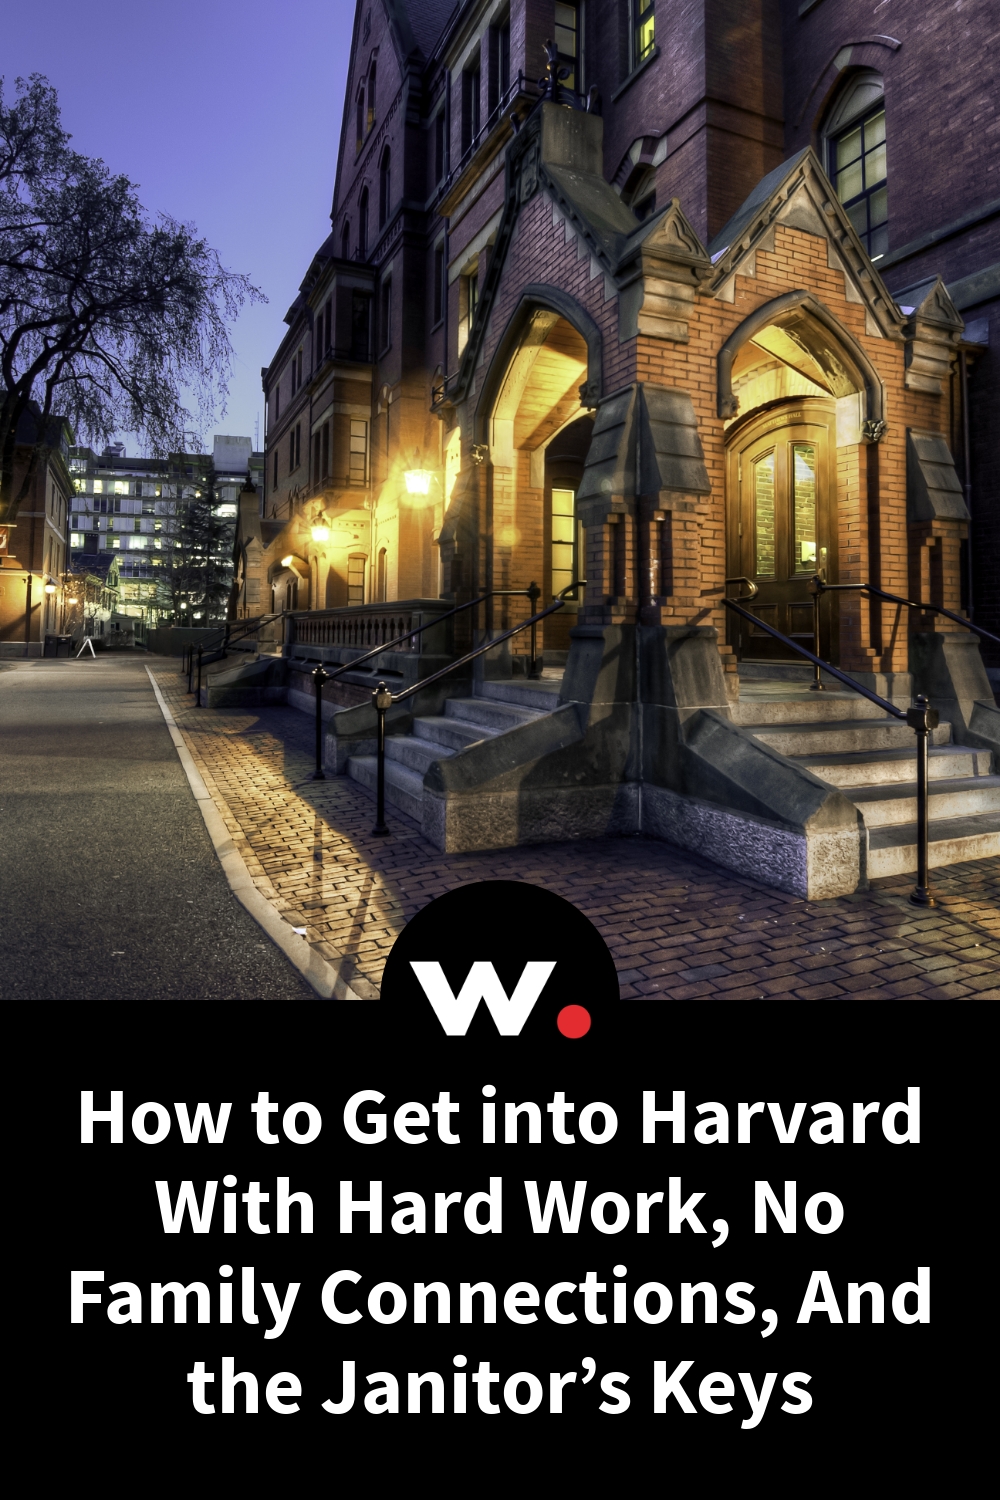 How to Get into Harvard With Hard Work, No Family Connections, And the Janitor’s Keys